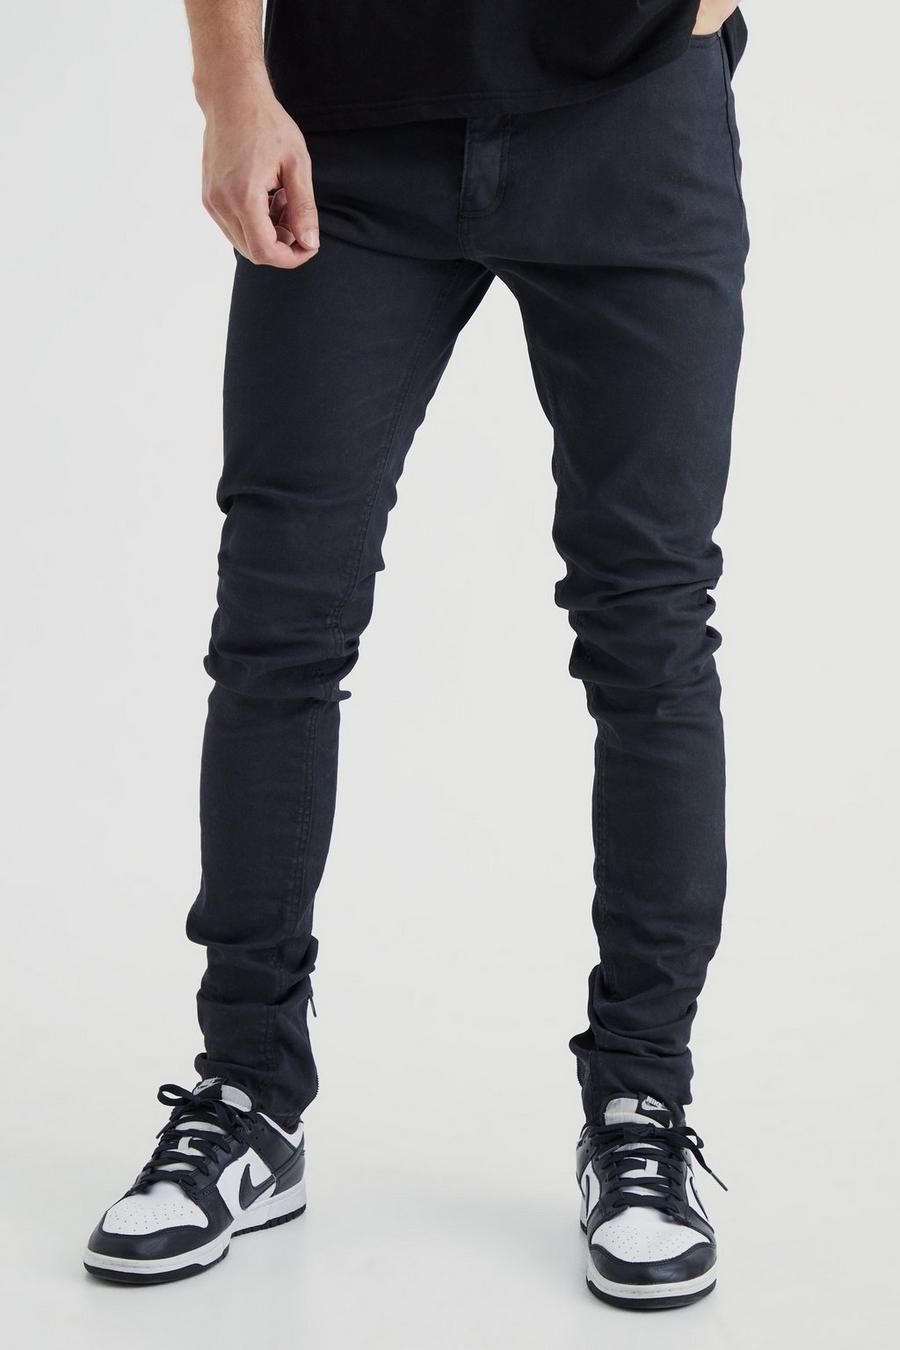 Black negro Tall Skinny Stacked Zip Gusset Coated Jean